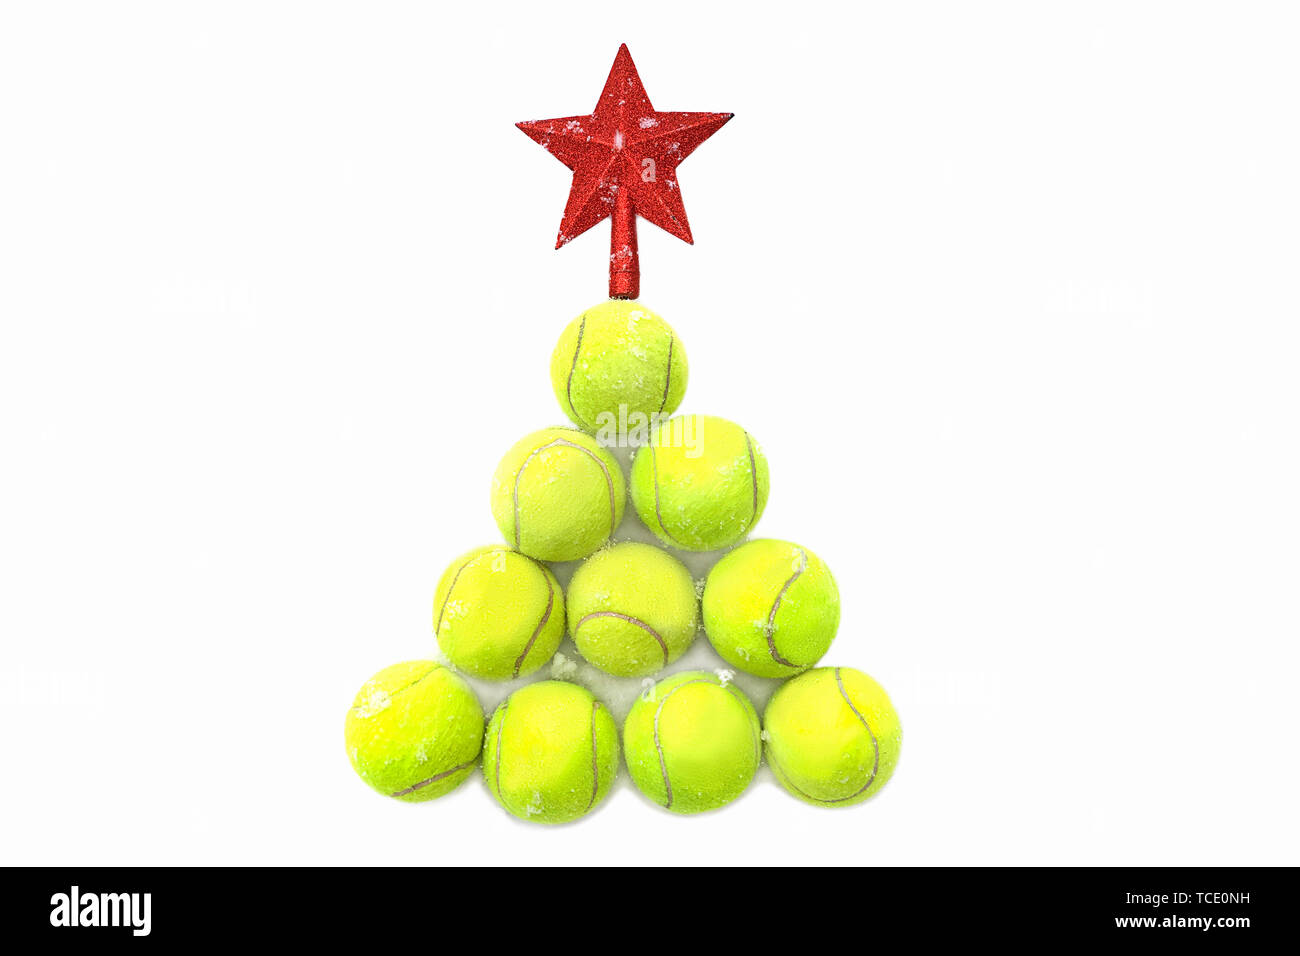 Red star on tennis ball on white snow background. Merry Christmas and New year concept with tennis balls. Stock Photo